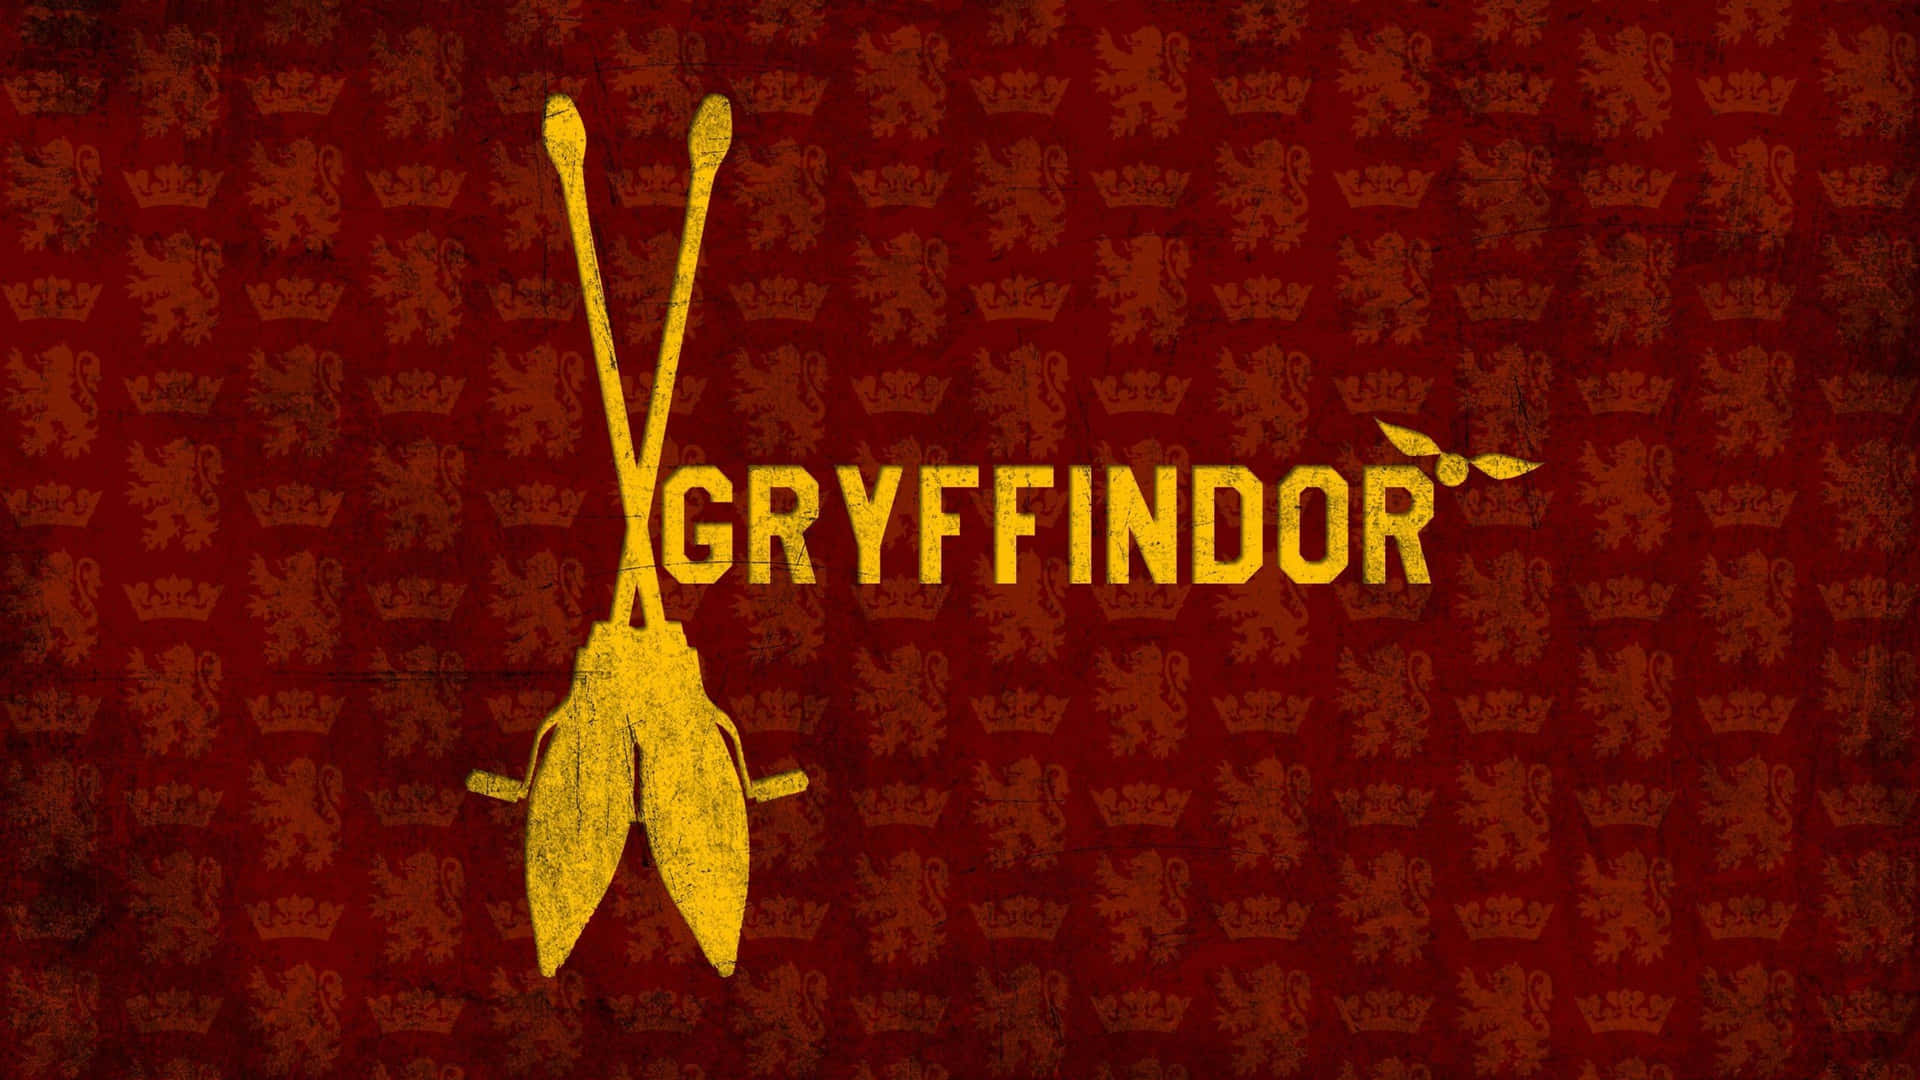 Dedicated to the brave and courageous members of Gryffindor